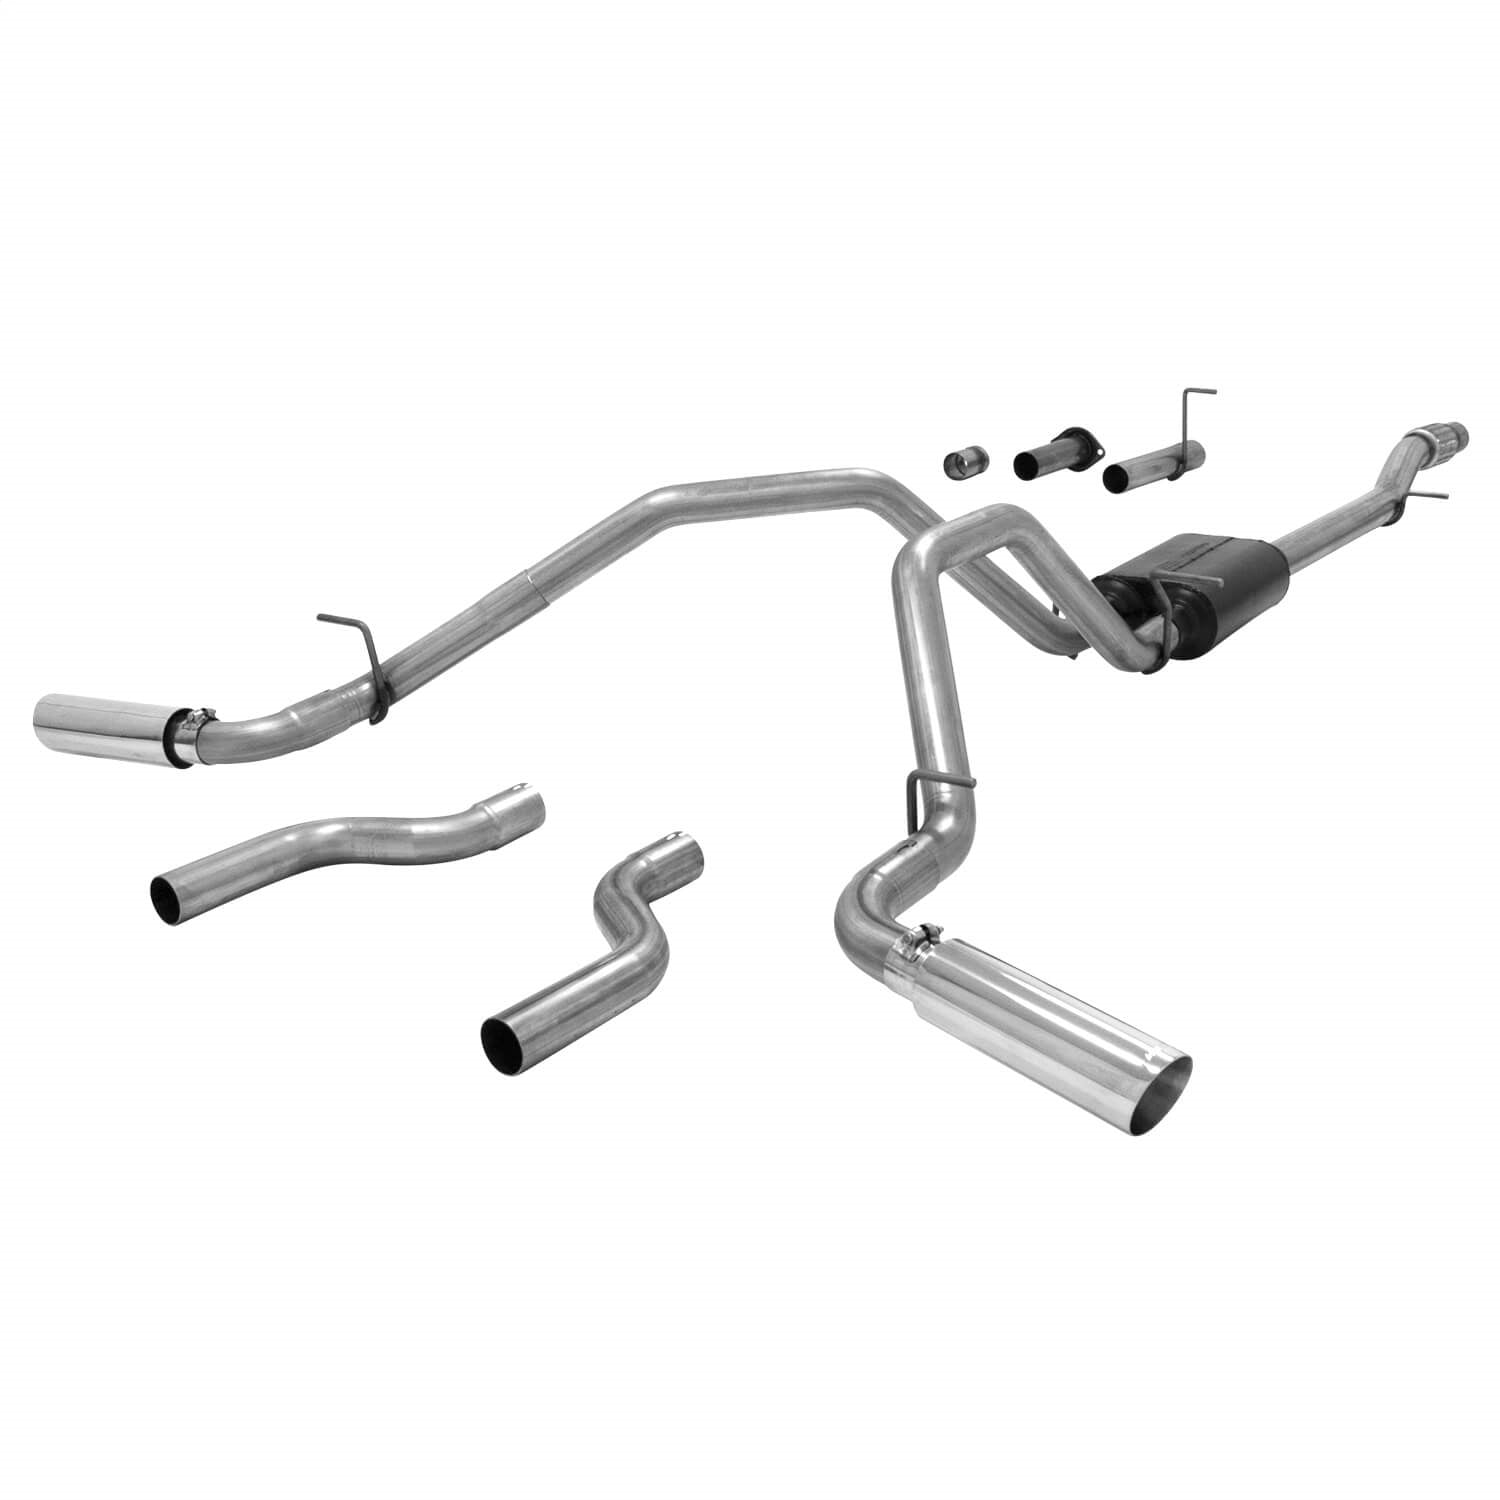 Flowmaster 817680 American Thunder Cat Back Exhaust System